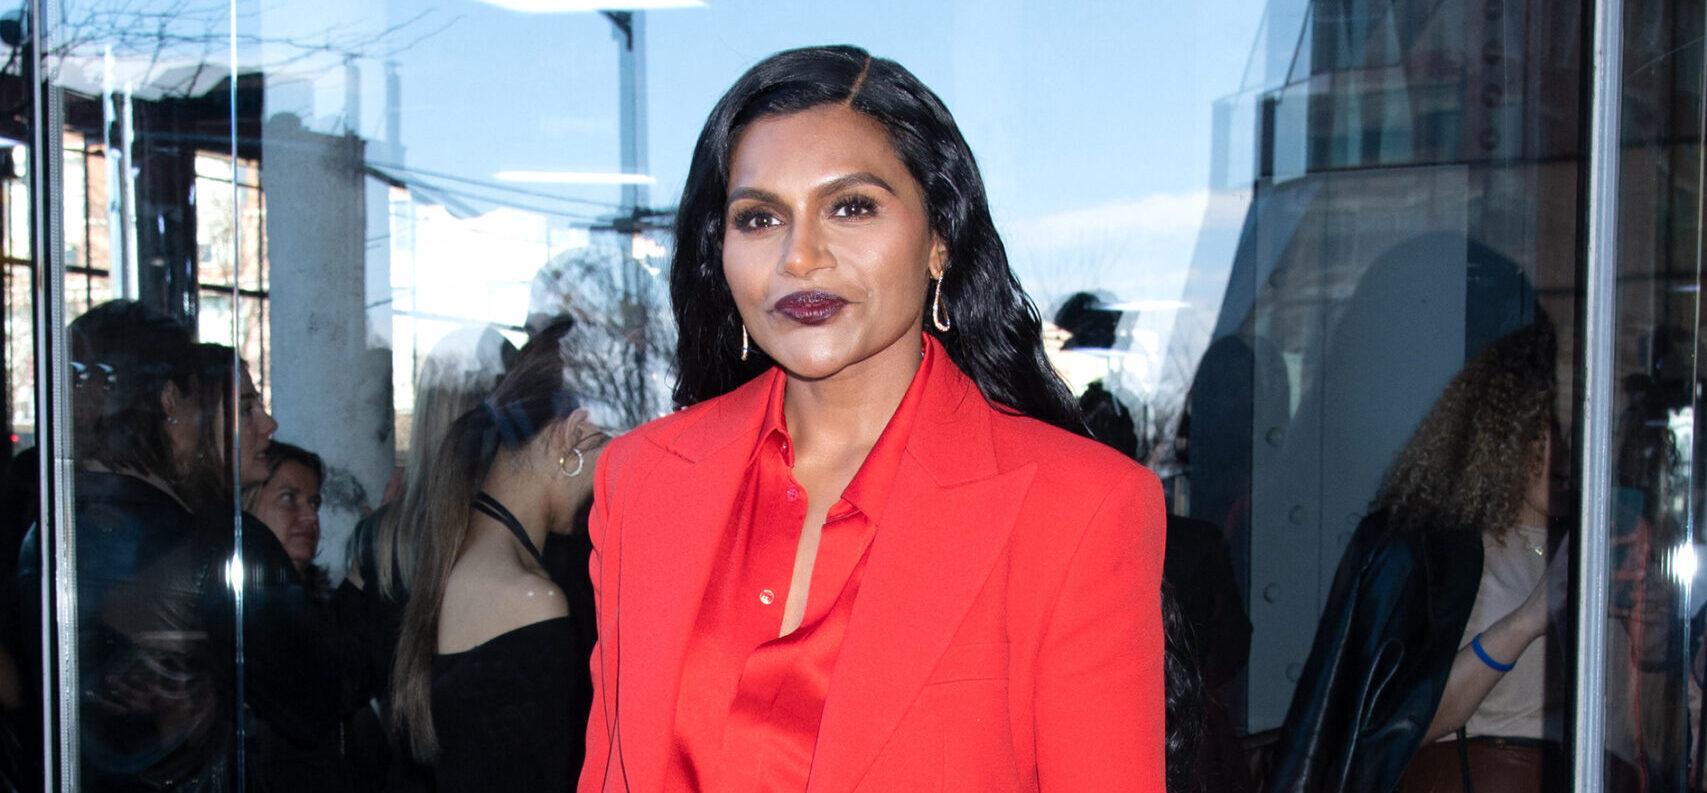 Mindy Kaling’s Thirst Trap Turns Into Roast Over Her New Image